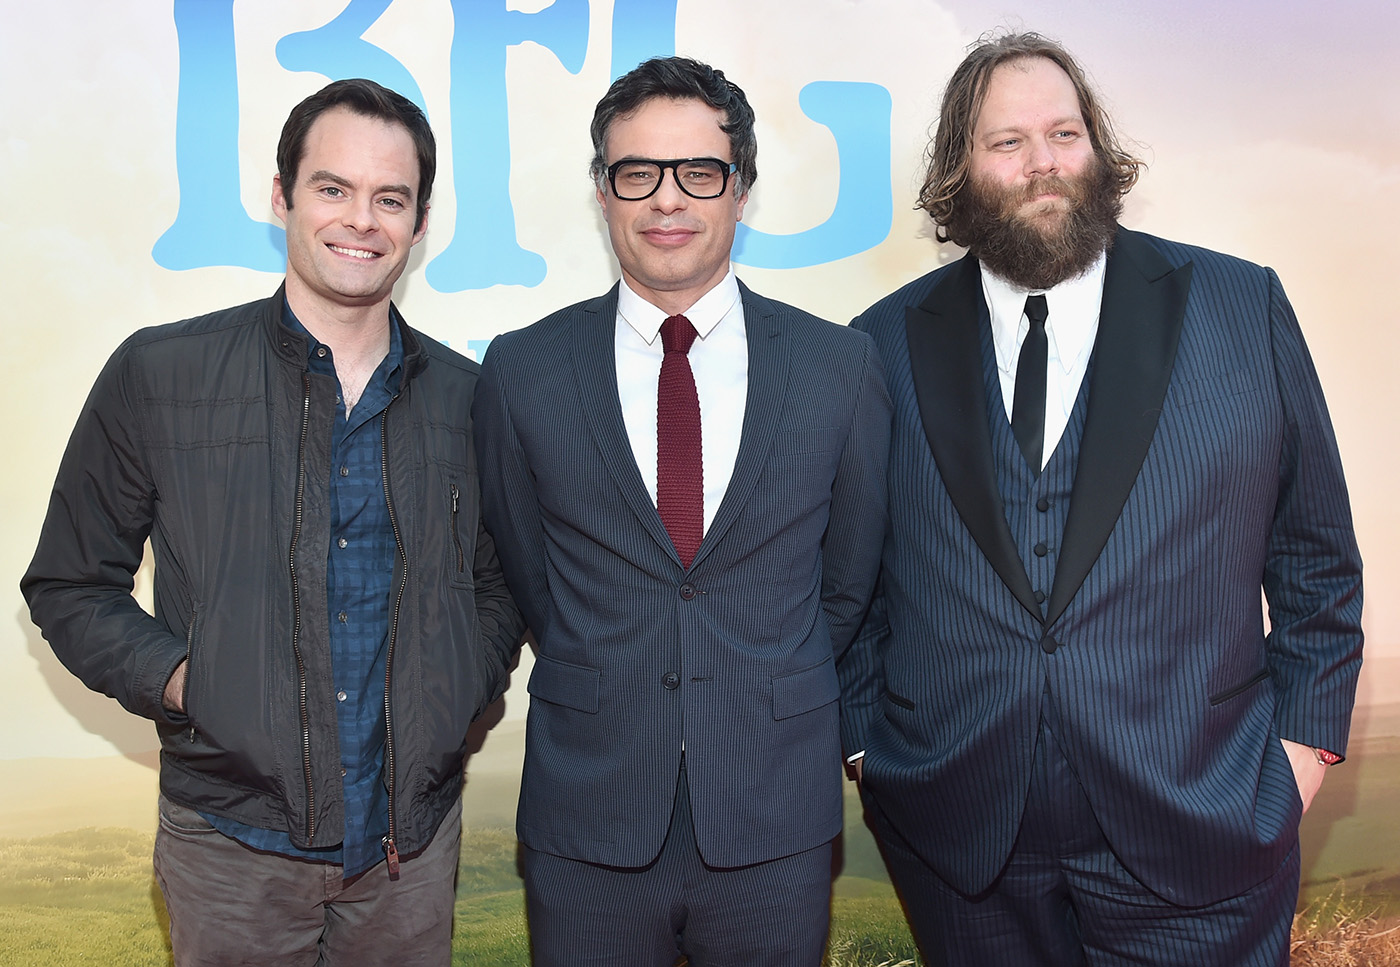 HOLLYWOOD, CA - JUNE 21: (L-R) Actors Bill Hader, Jemaine Clement and Olafur Darri Olafsson arrive on the red carpet for the US premiere of Disney's "The BFG," directed and produced by Steven Spielberg. A giant sized crowd lined the streets of Hollywood Boulevard to see stars arrive at the El Capitan Theatre. "The BFG" opens in U.S. theaters on July 1, 2016, the year that marks the 100th anniversary of Dahl's birth, at the El Capitan Theatre on June 21, 2016 in Hollywood, California. (Photo by Alberto E. Rodriguez/Getty Images for Disney) *** Local Caption *** Bill Hader; Jemaine Clement; Olafur Darri Olafsson